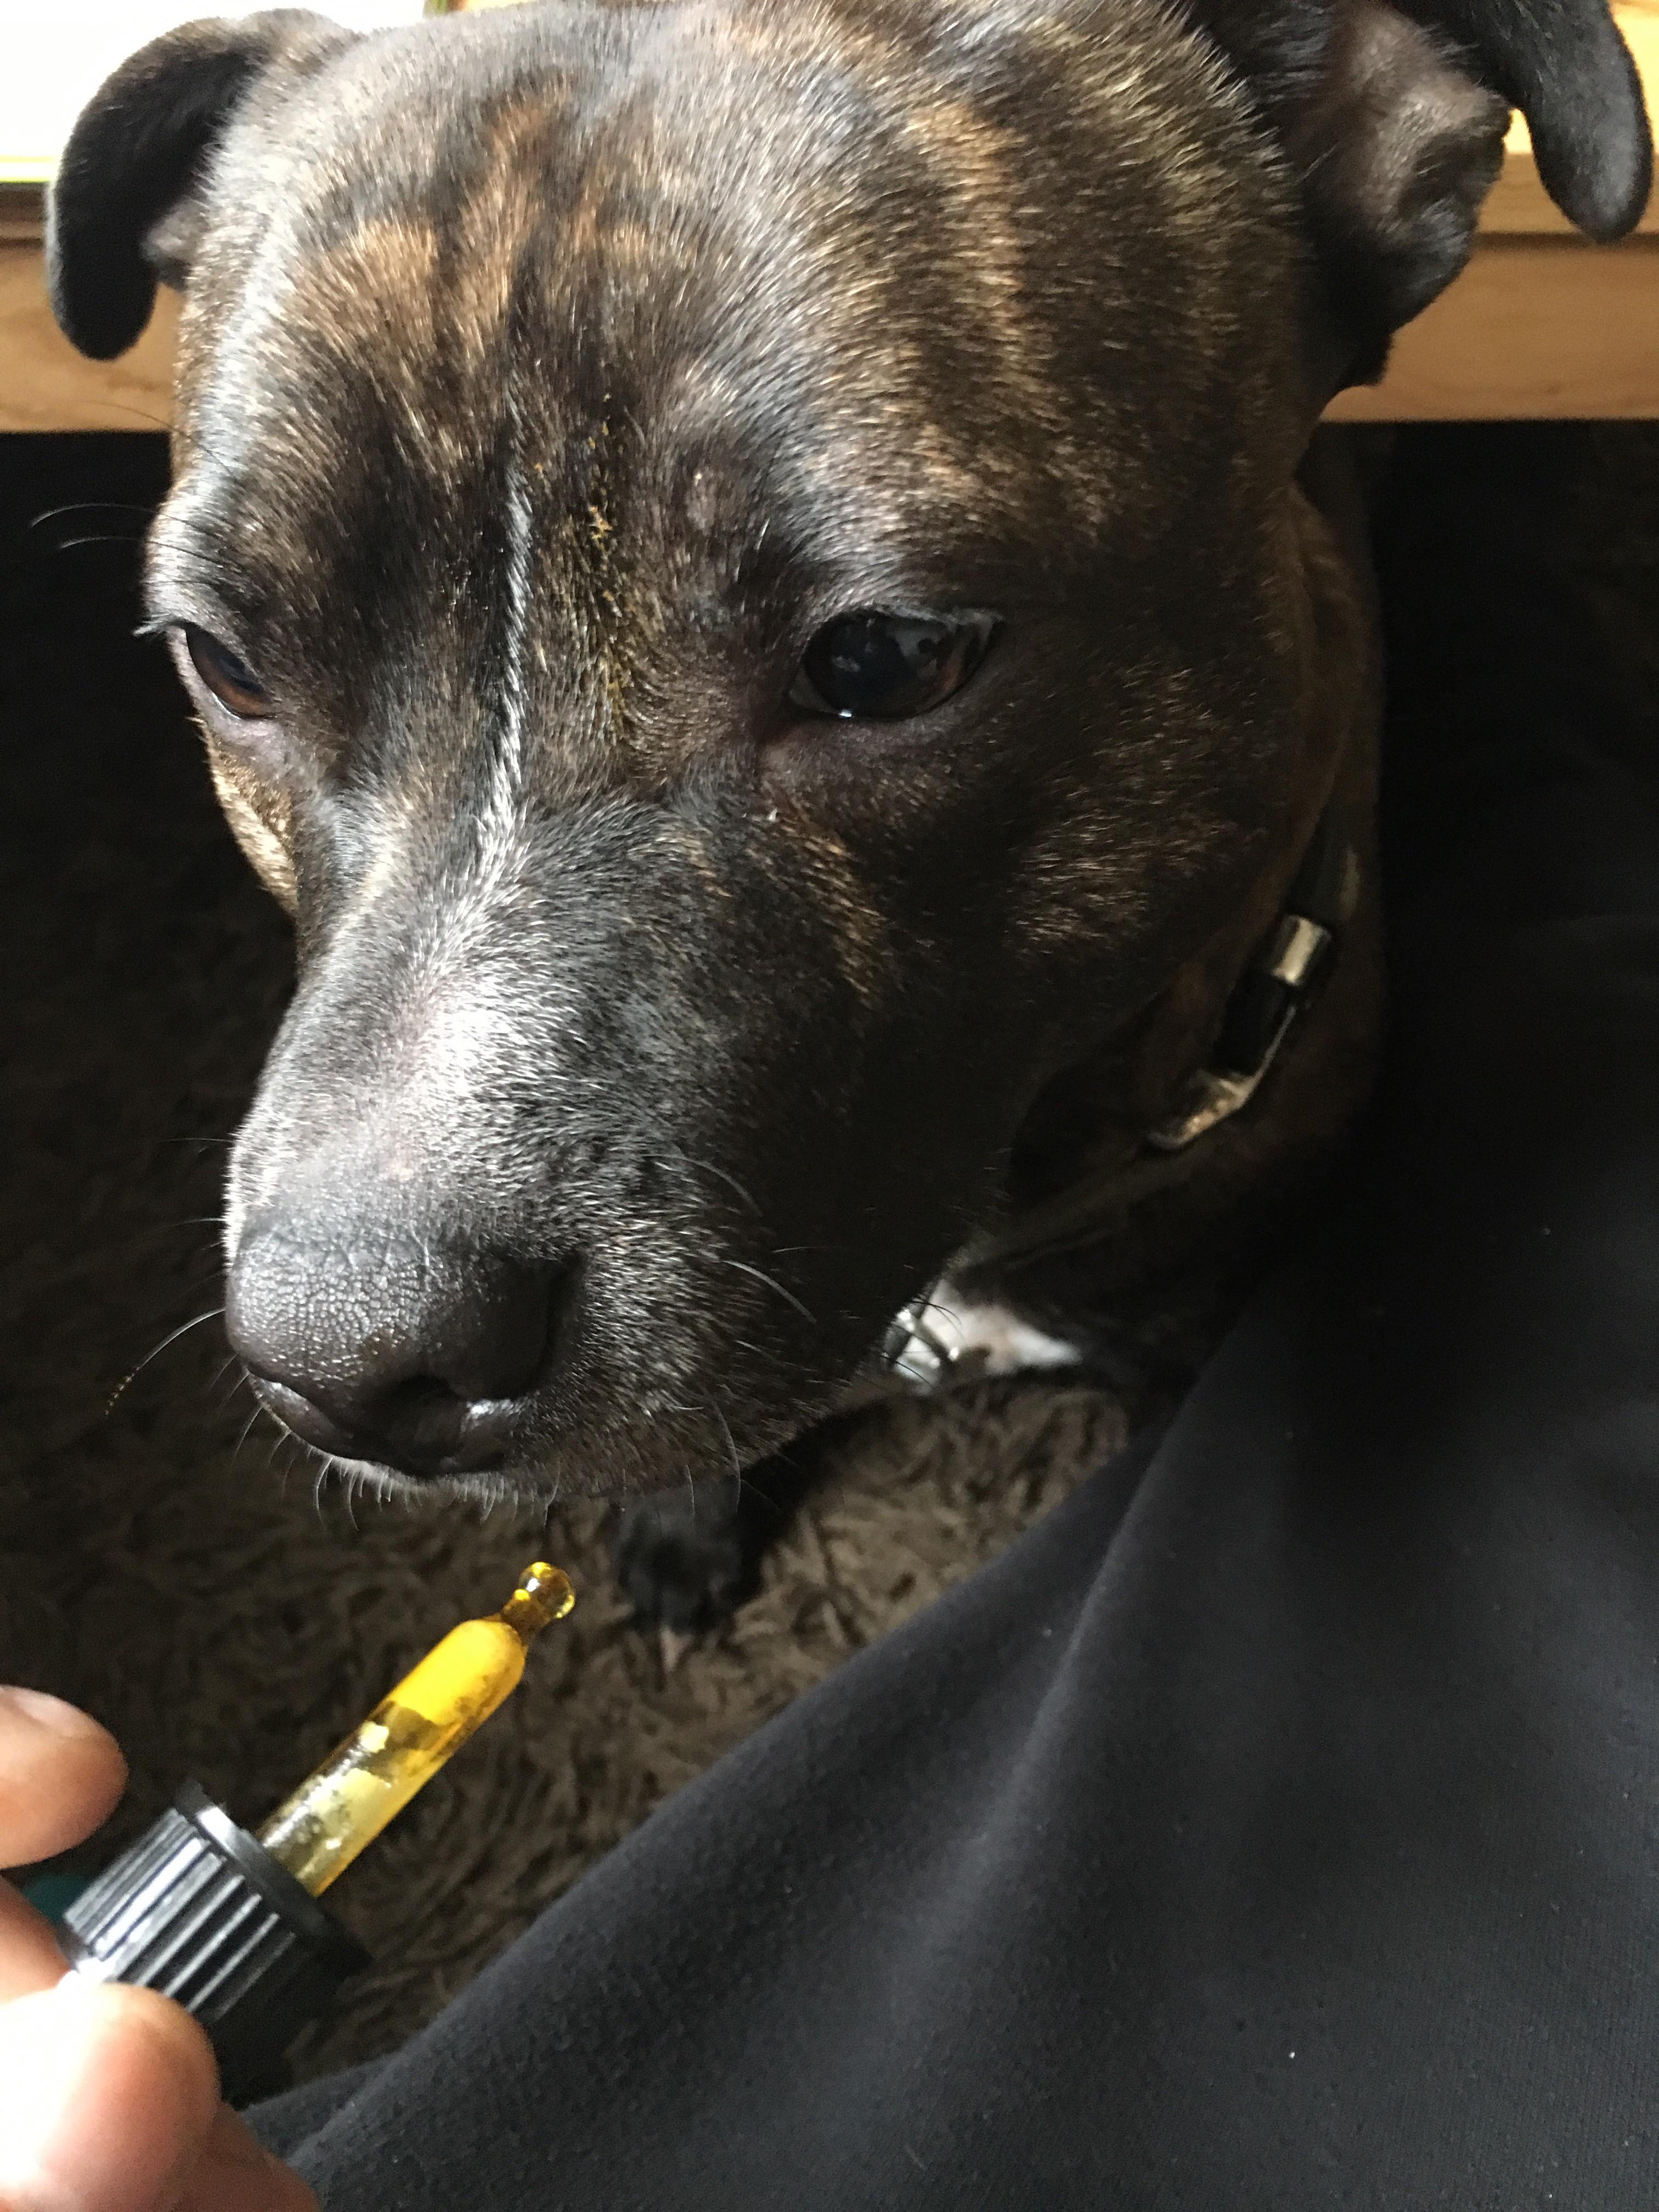 Dog given cannabis for epilepsy